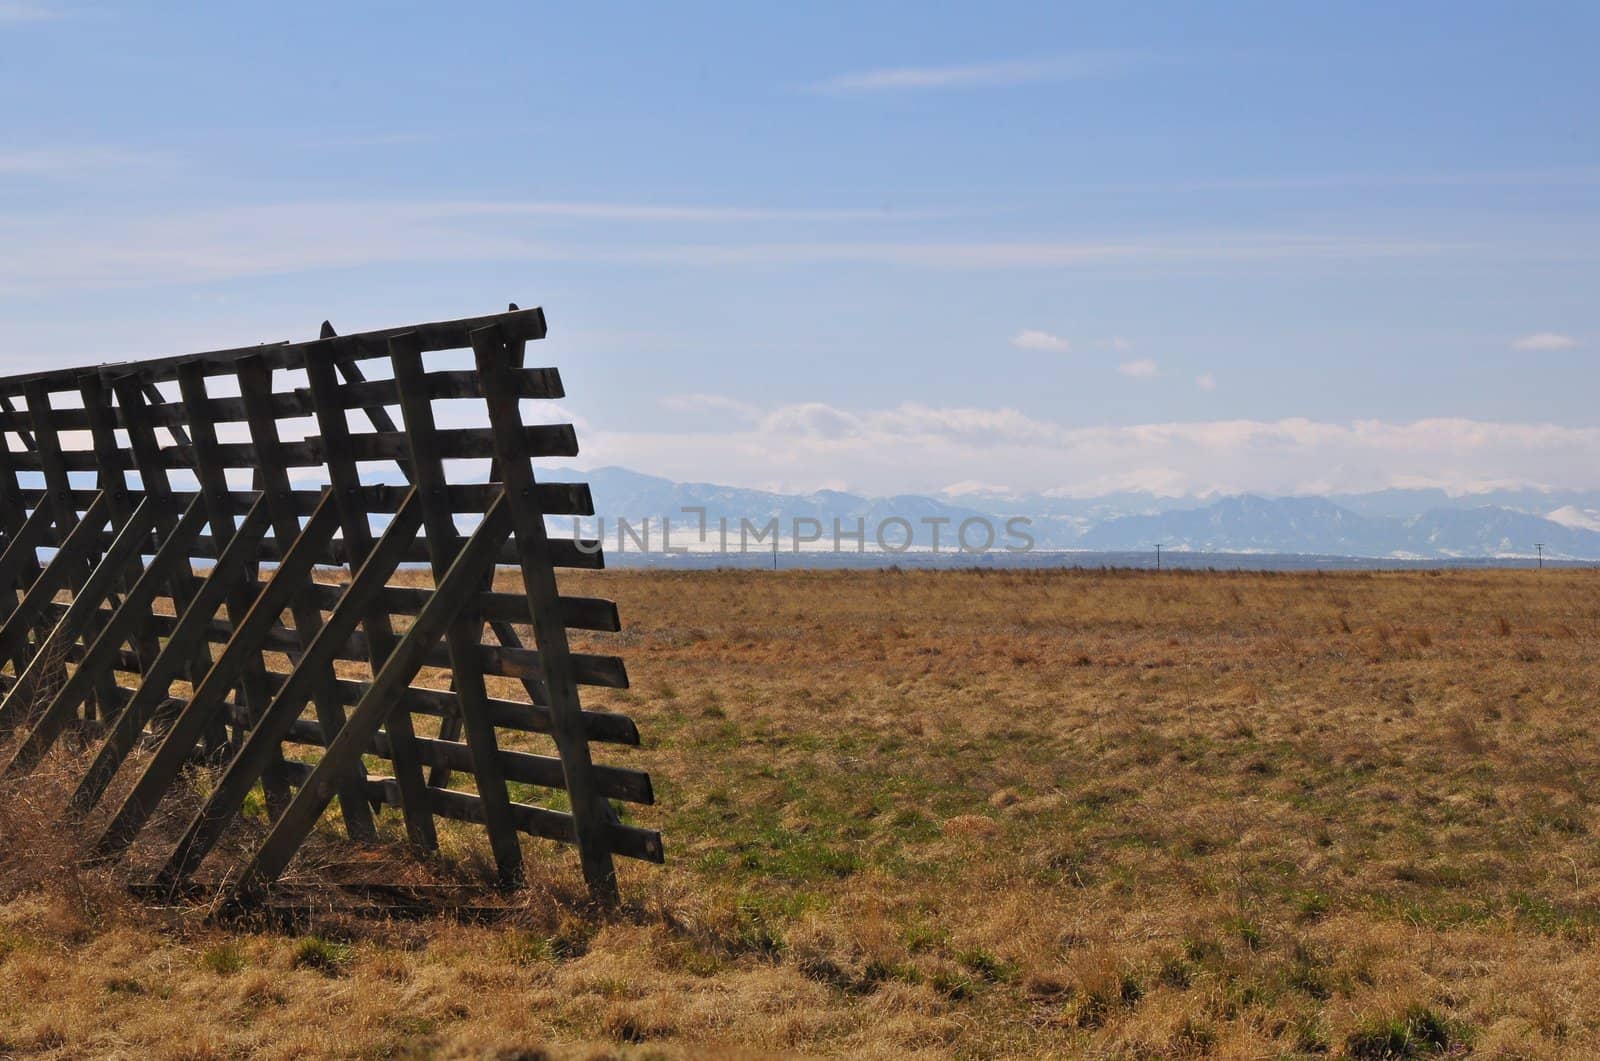 A fence stands in a field with the Rocky Mountains in the distance.